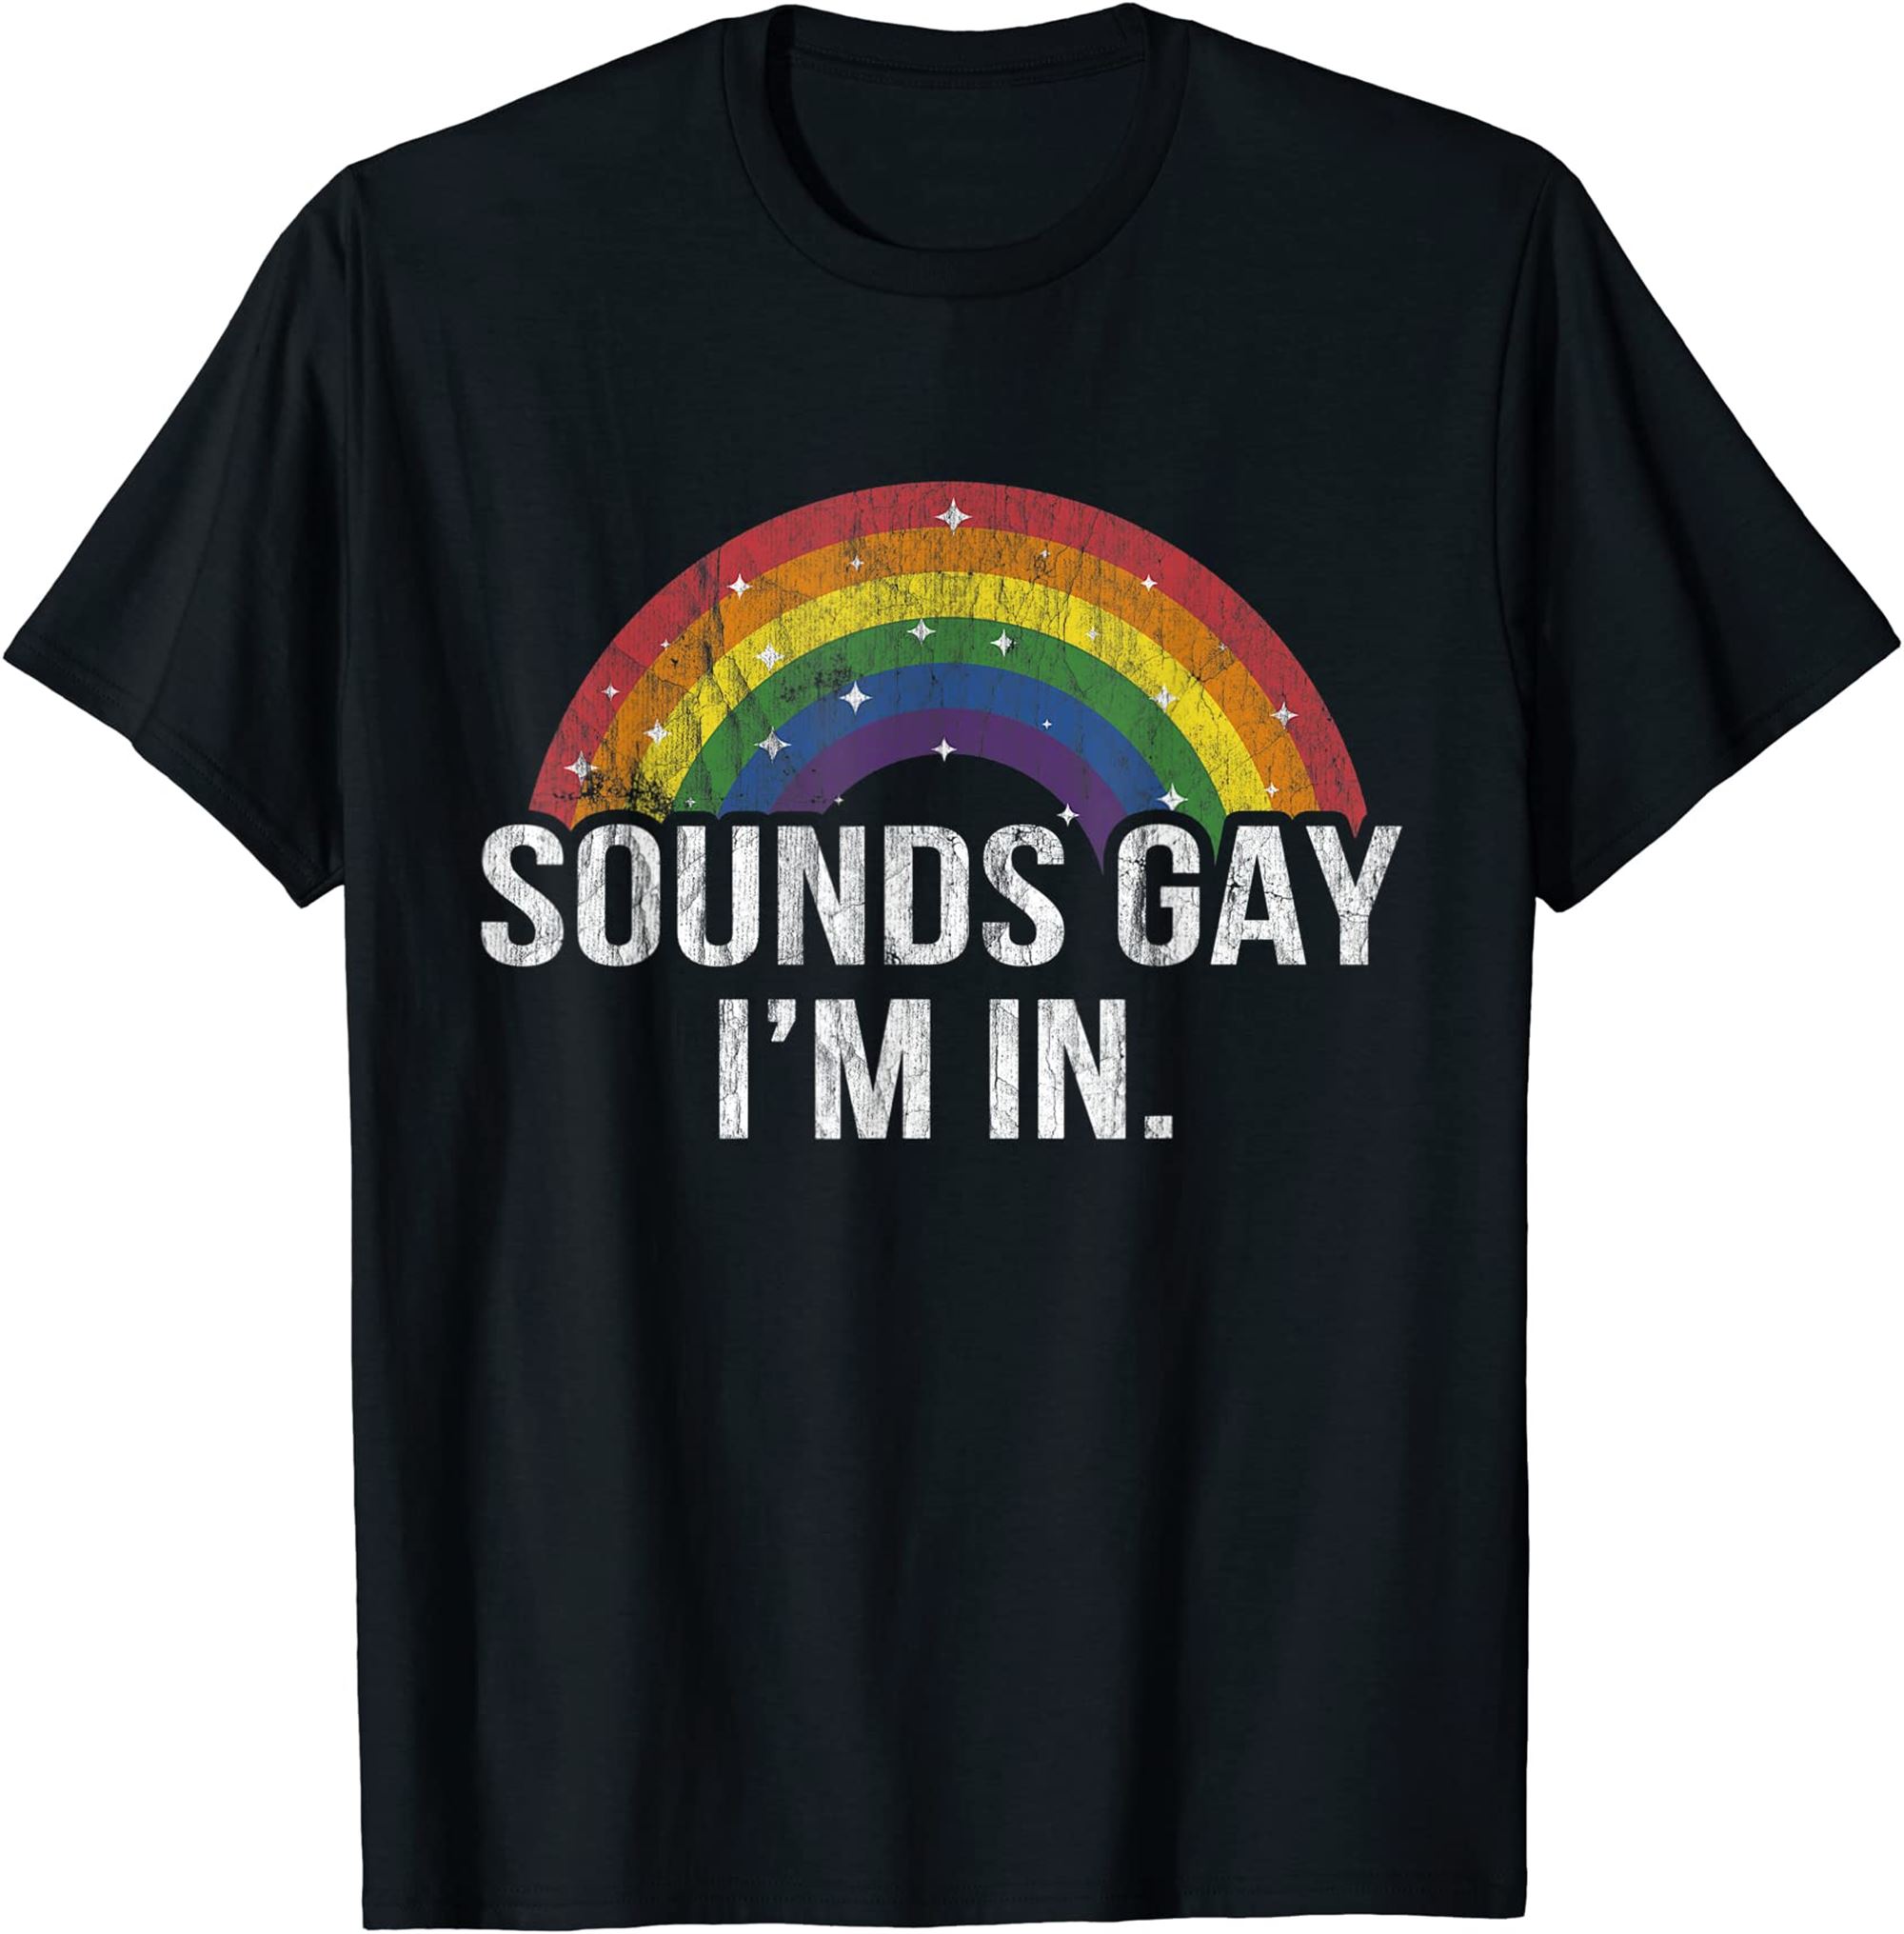 Funny Sounds Gay Im In With Rainbow Flag For Pride Month T-shirt Full Size Up To 5xl